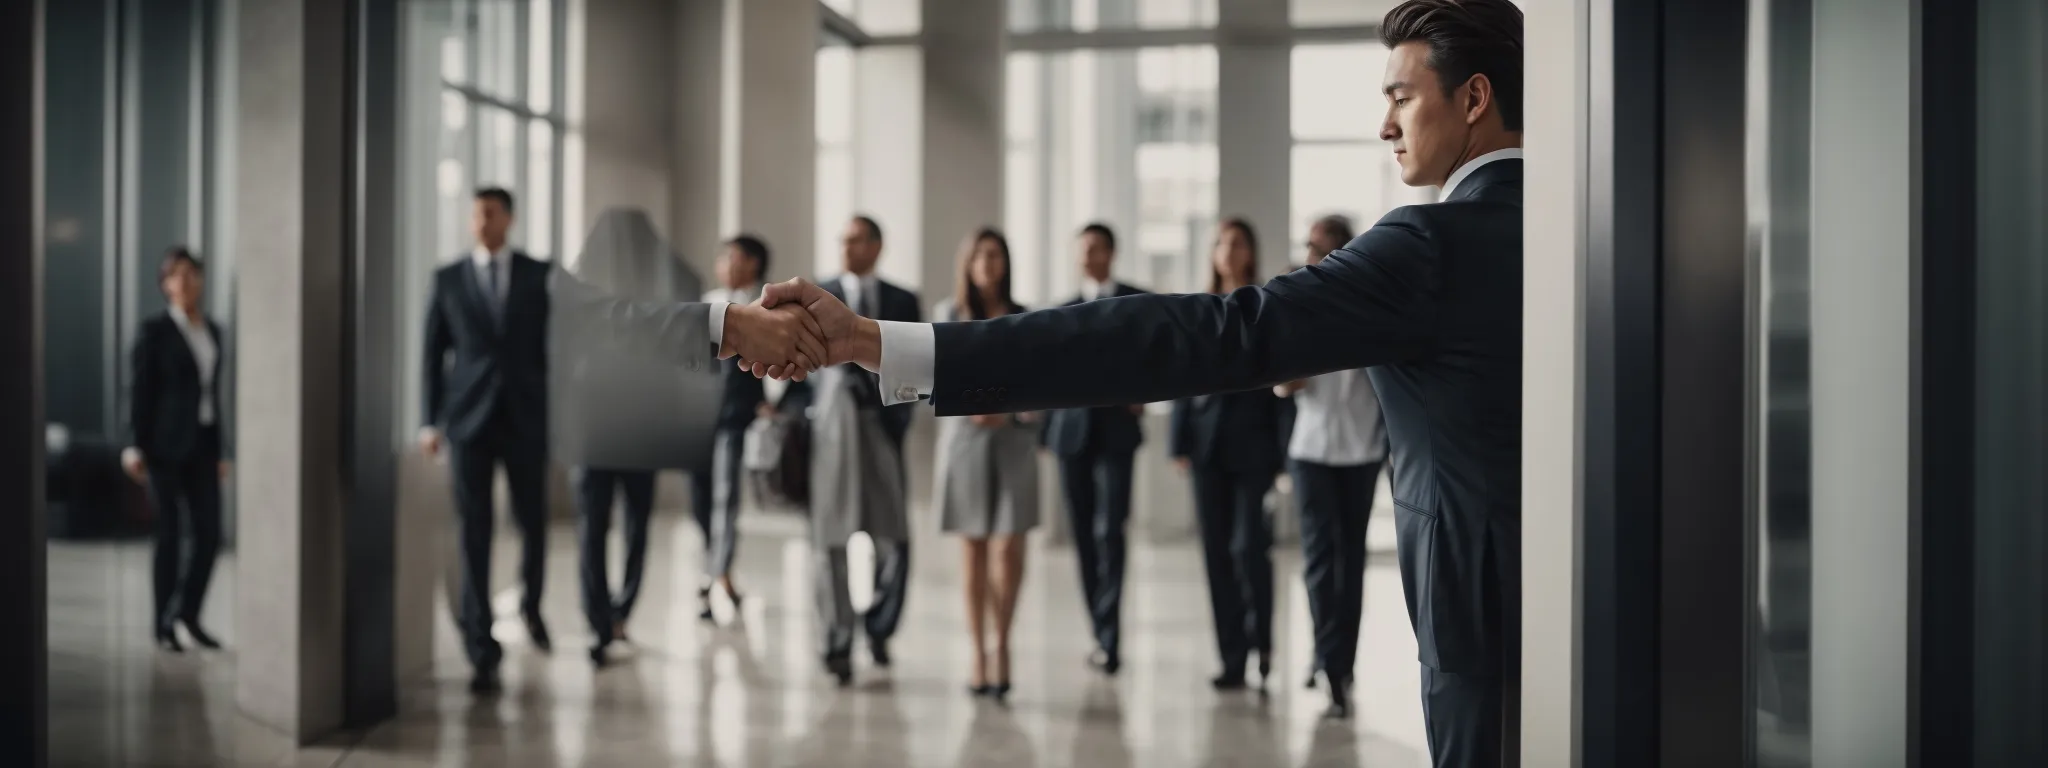 a confident business person offering a firm handshake against a backdrop of a secure, modern website interface.